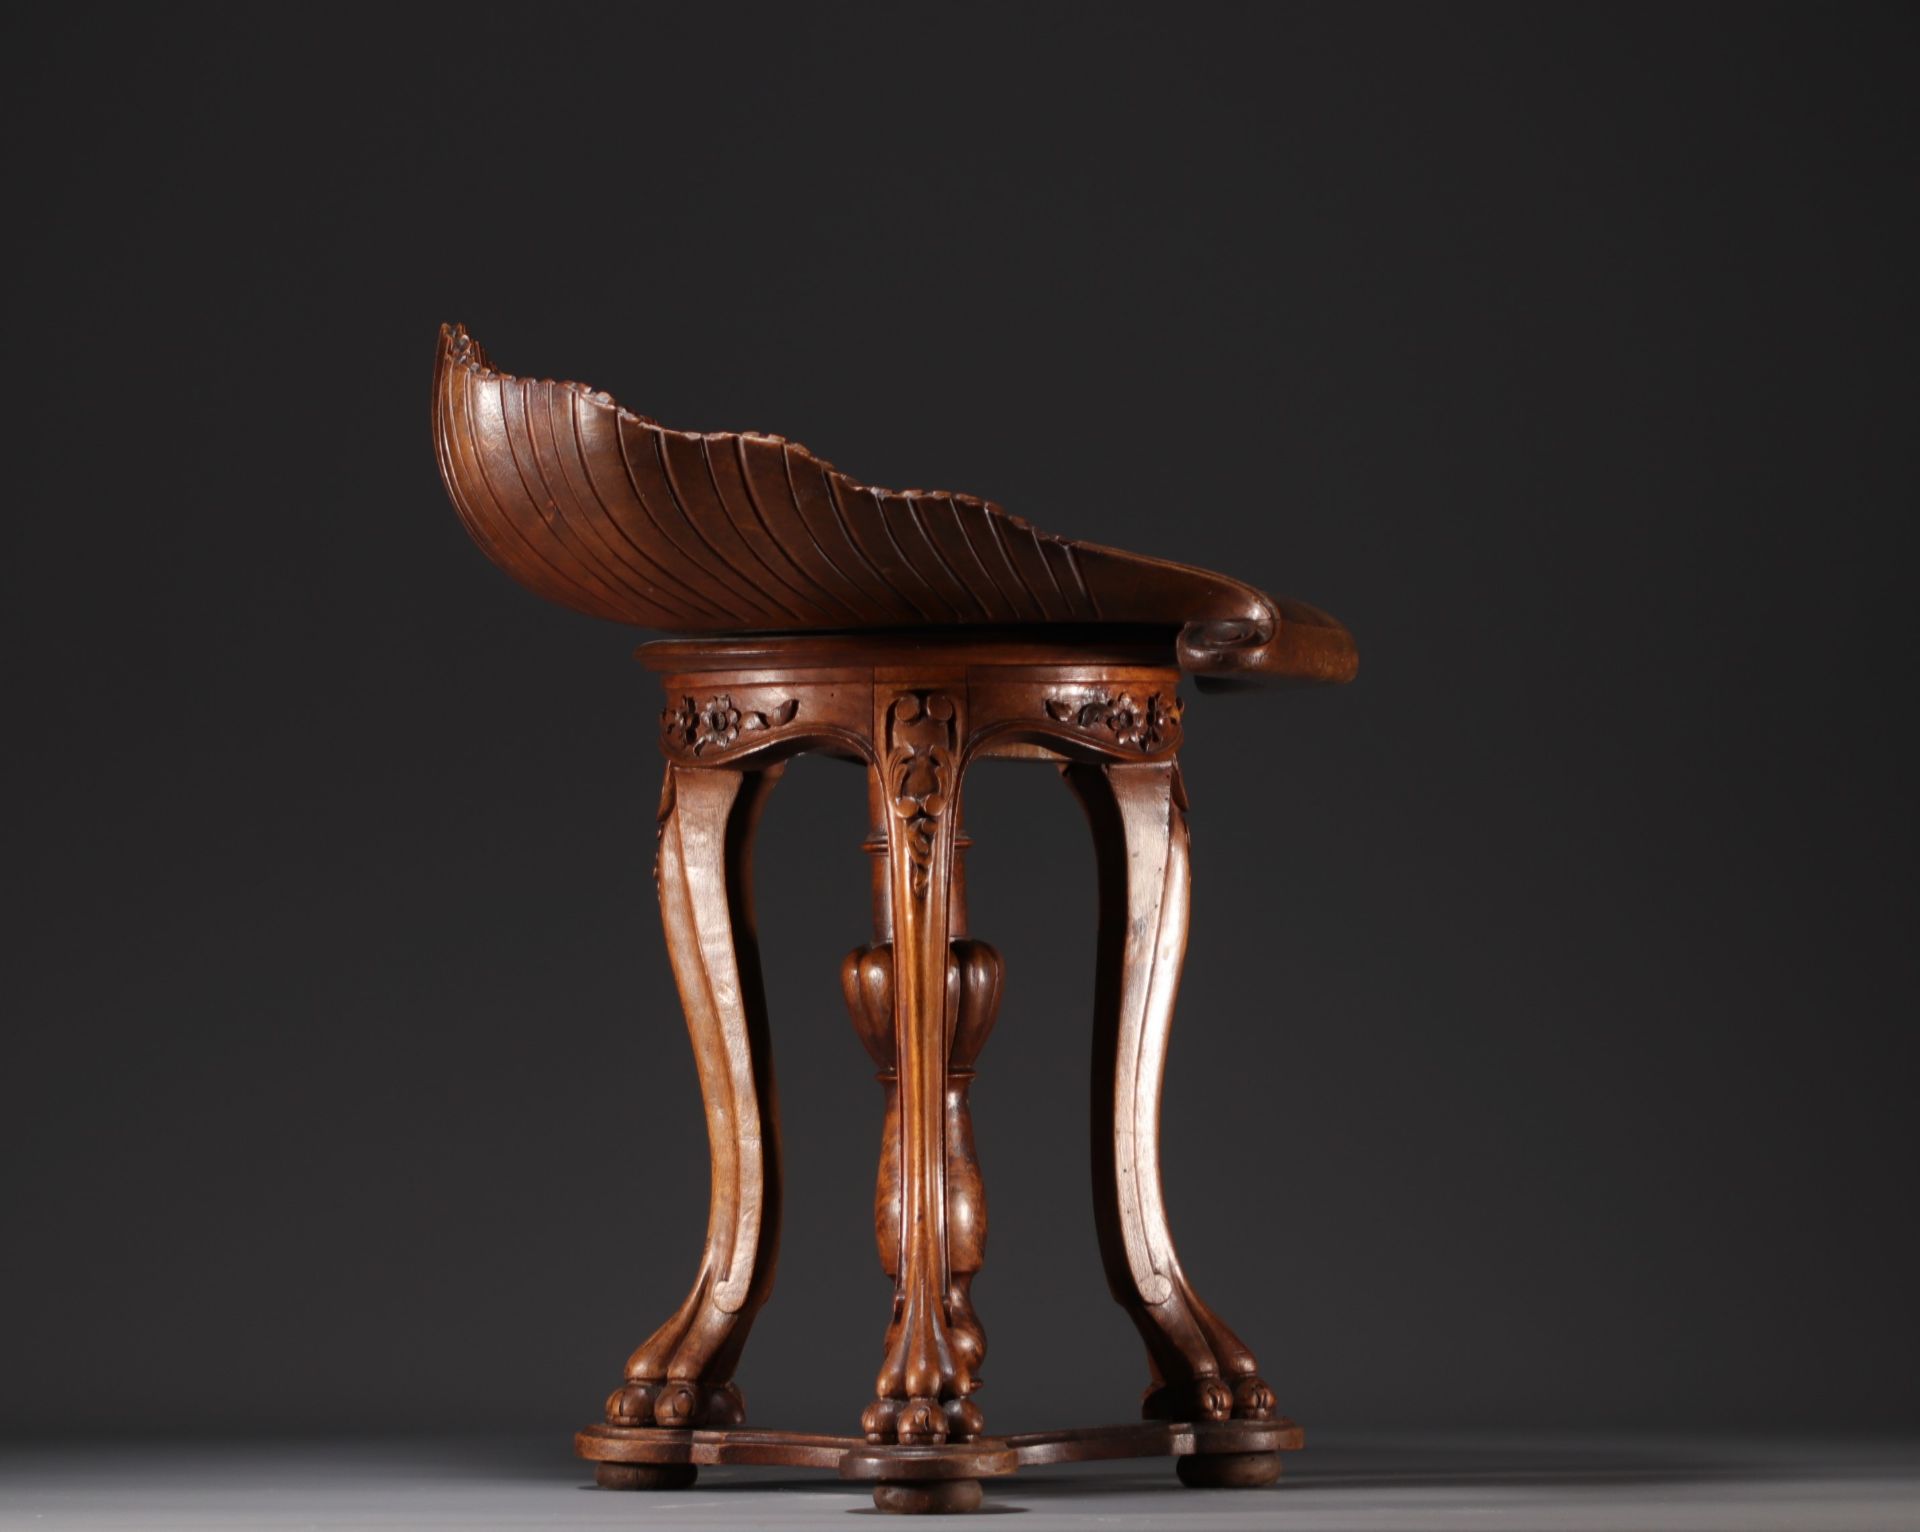 Venetian "Grotto" pianist's or harpist's chair in carved walnut representing a shell on a tripod bas - Bild 2 aus 3